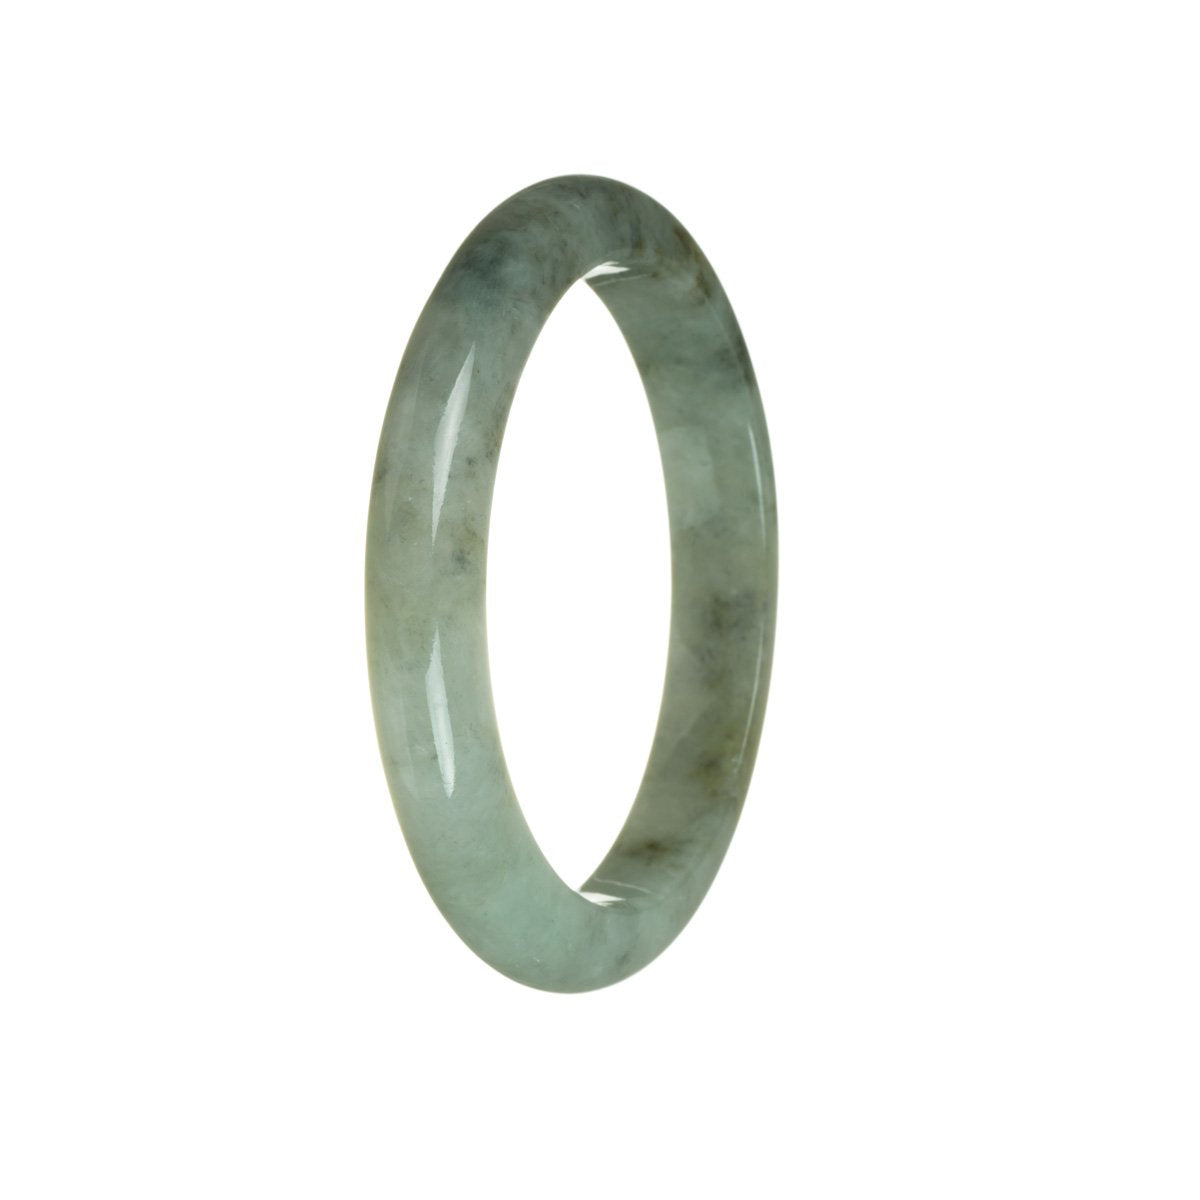 A half moon-shaped genuine Type A grey with green jade bracelet, measuring 60mm.